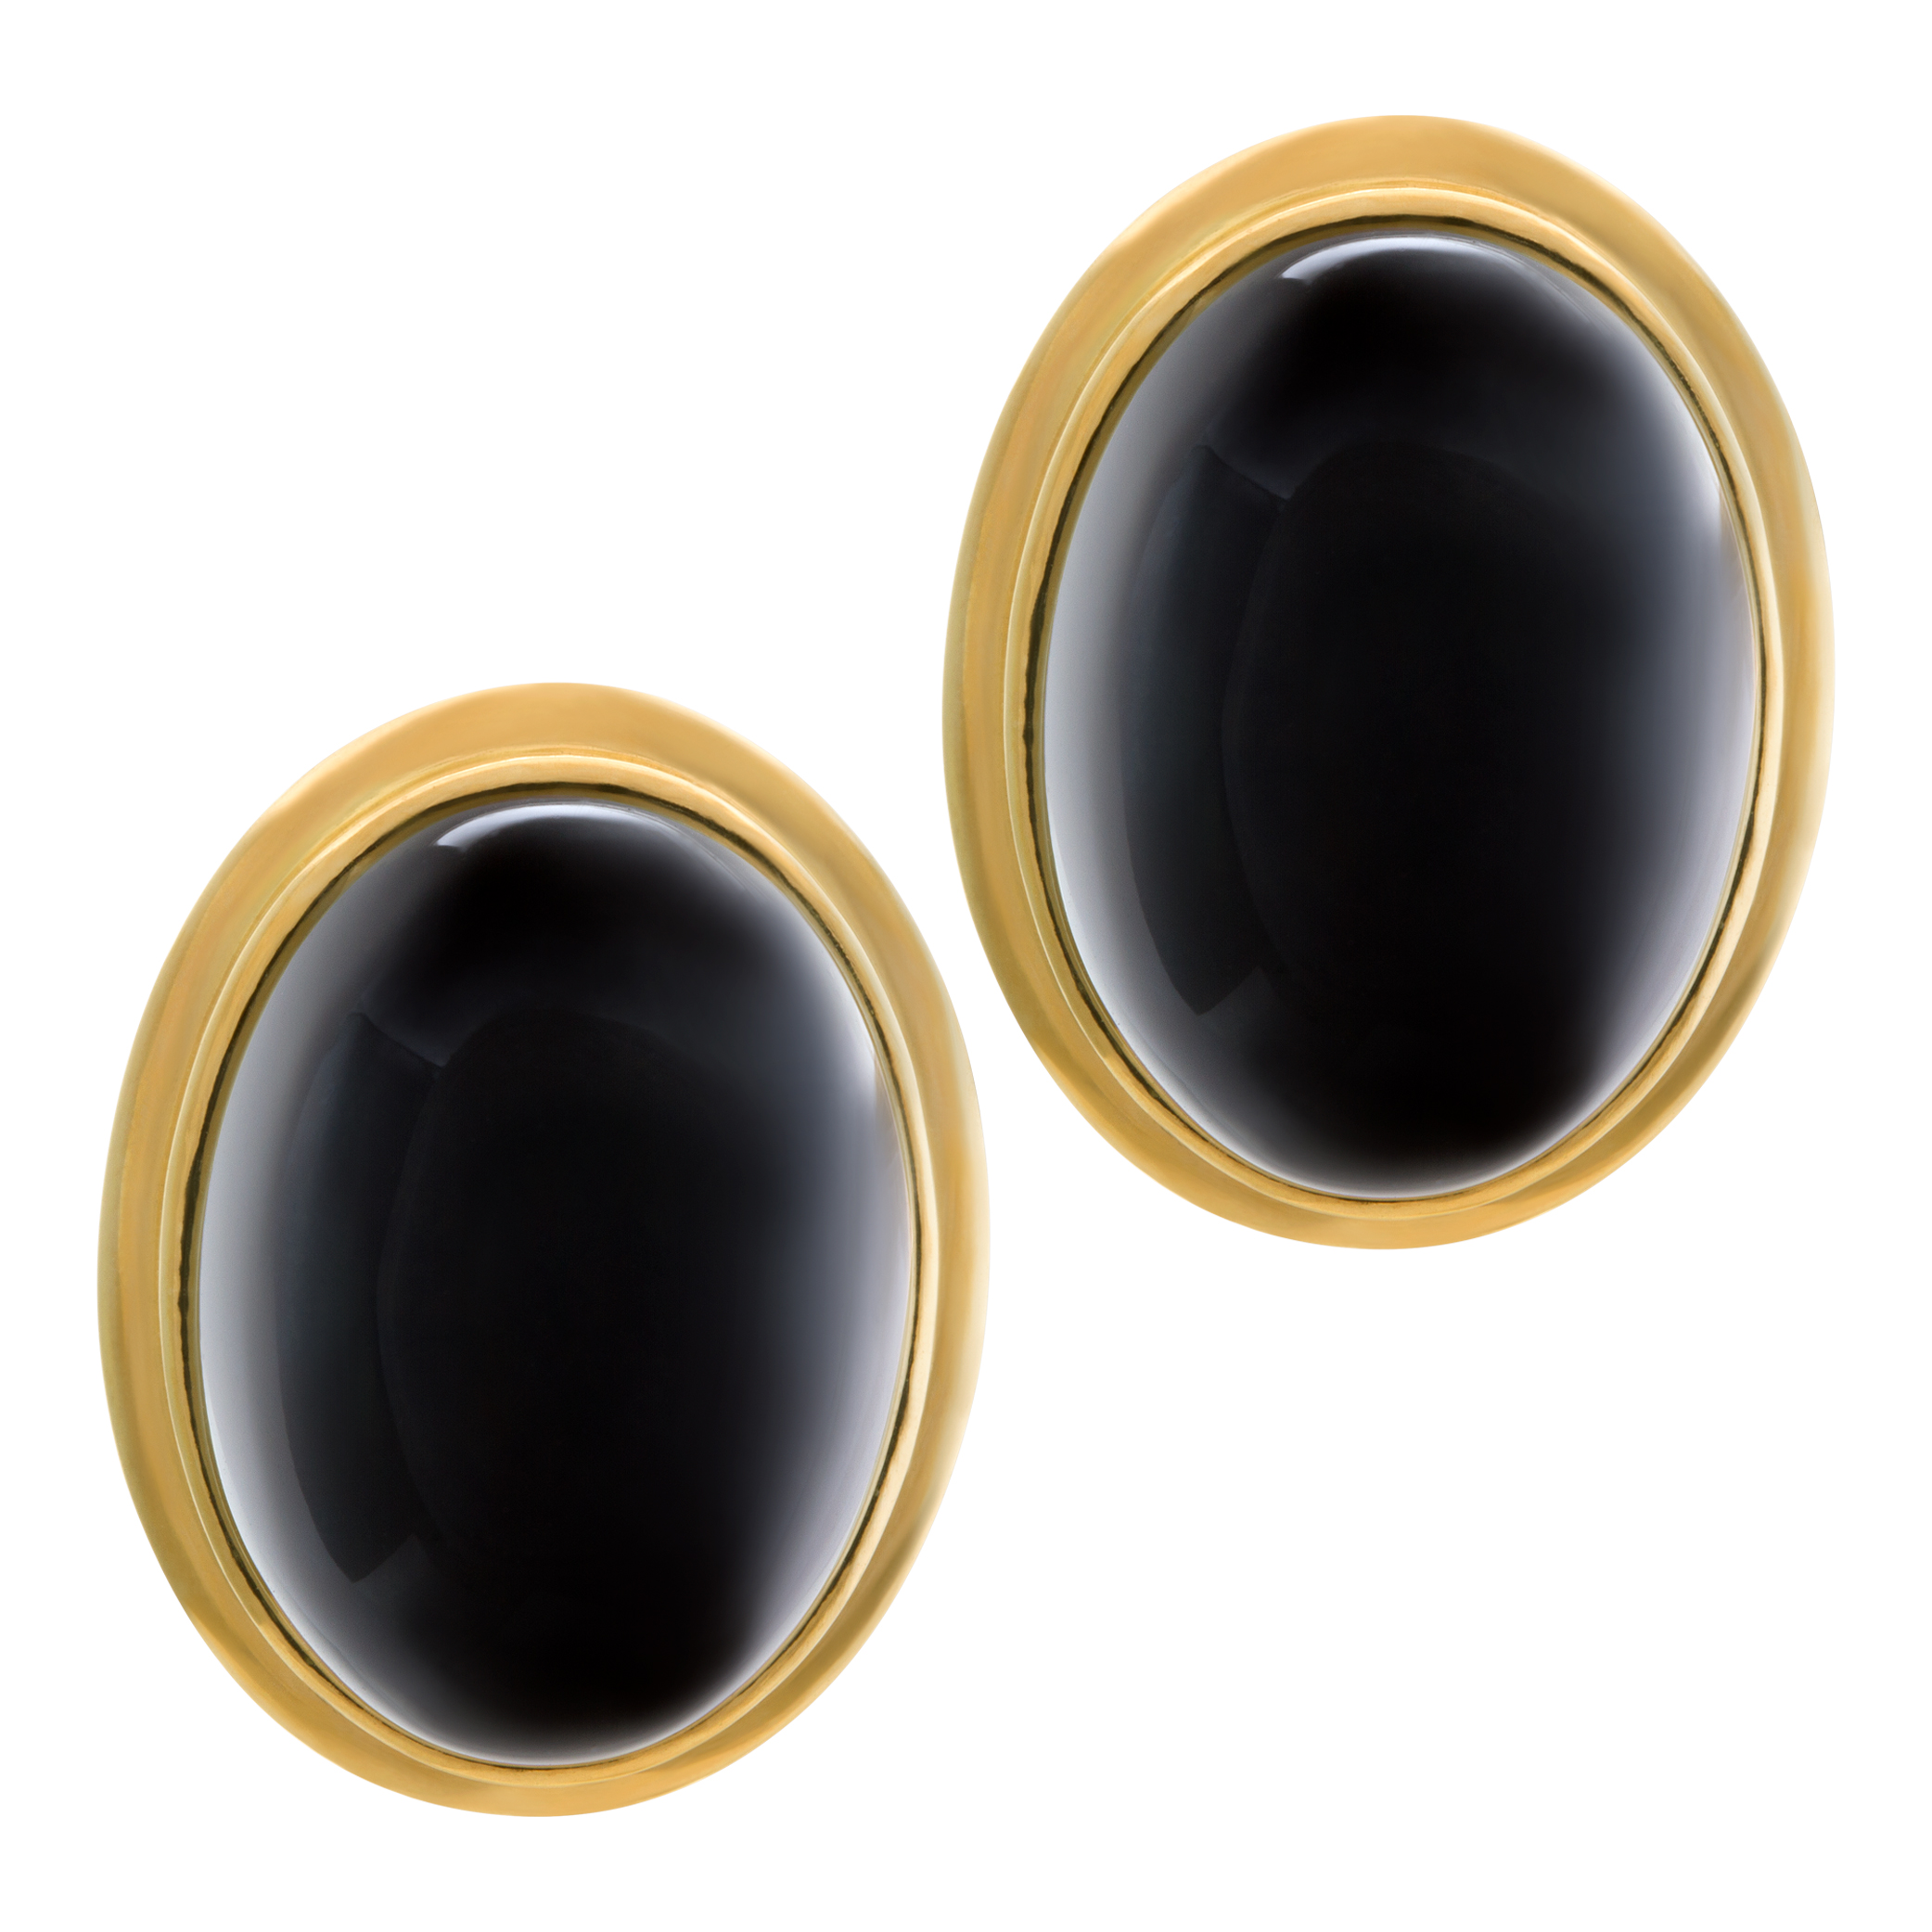 Large oval cabochon onyx earrings in 14k yellow gold. Omega clip with post.